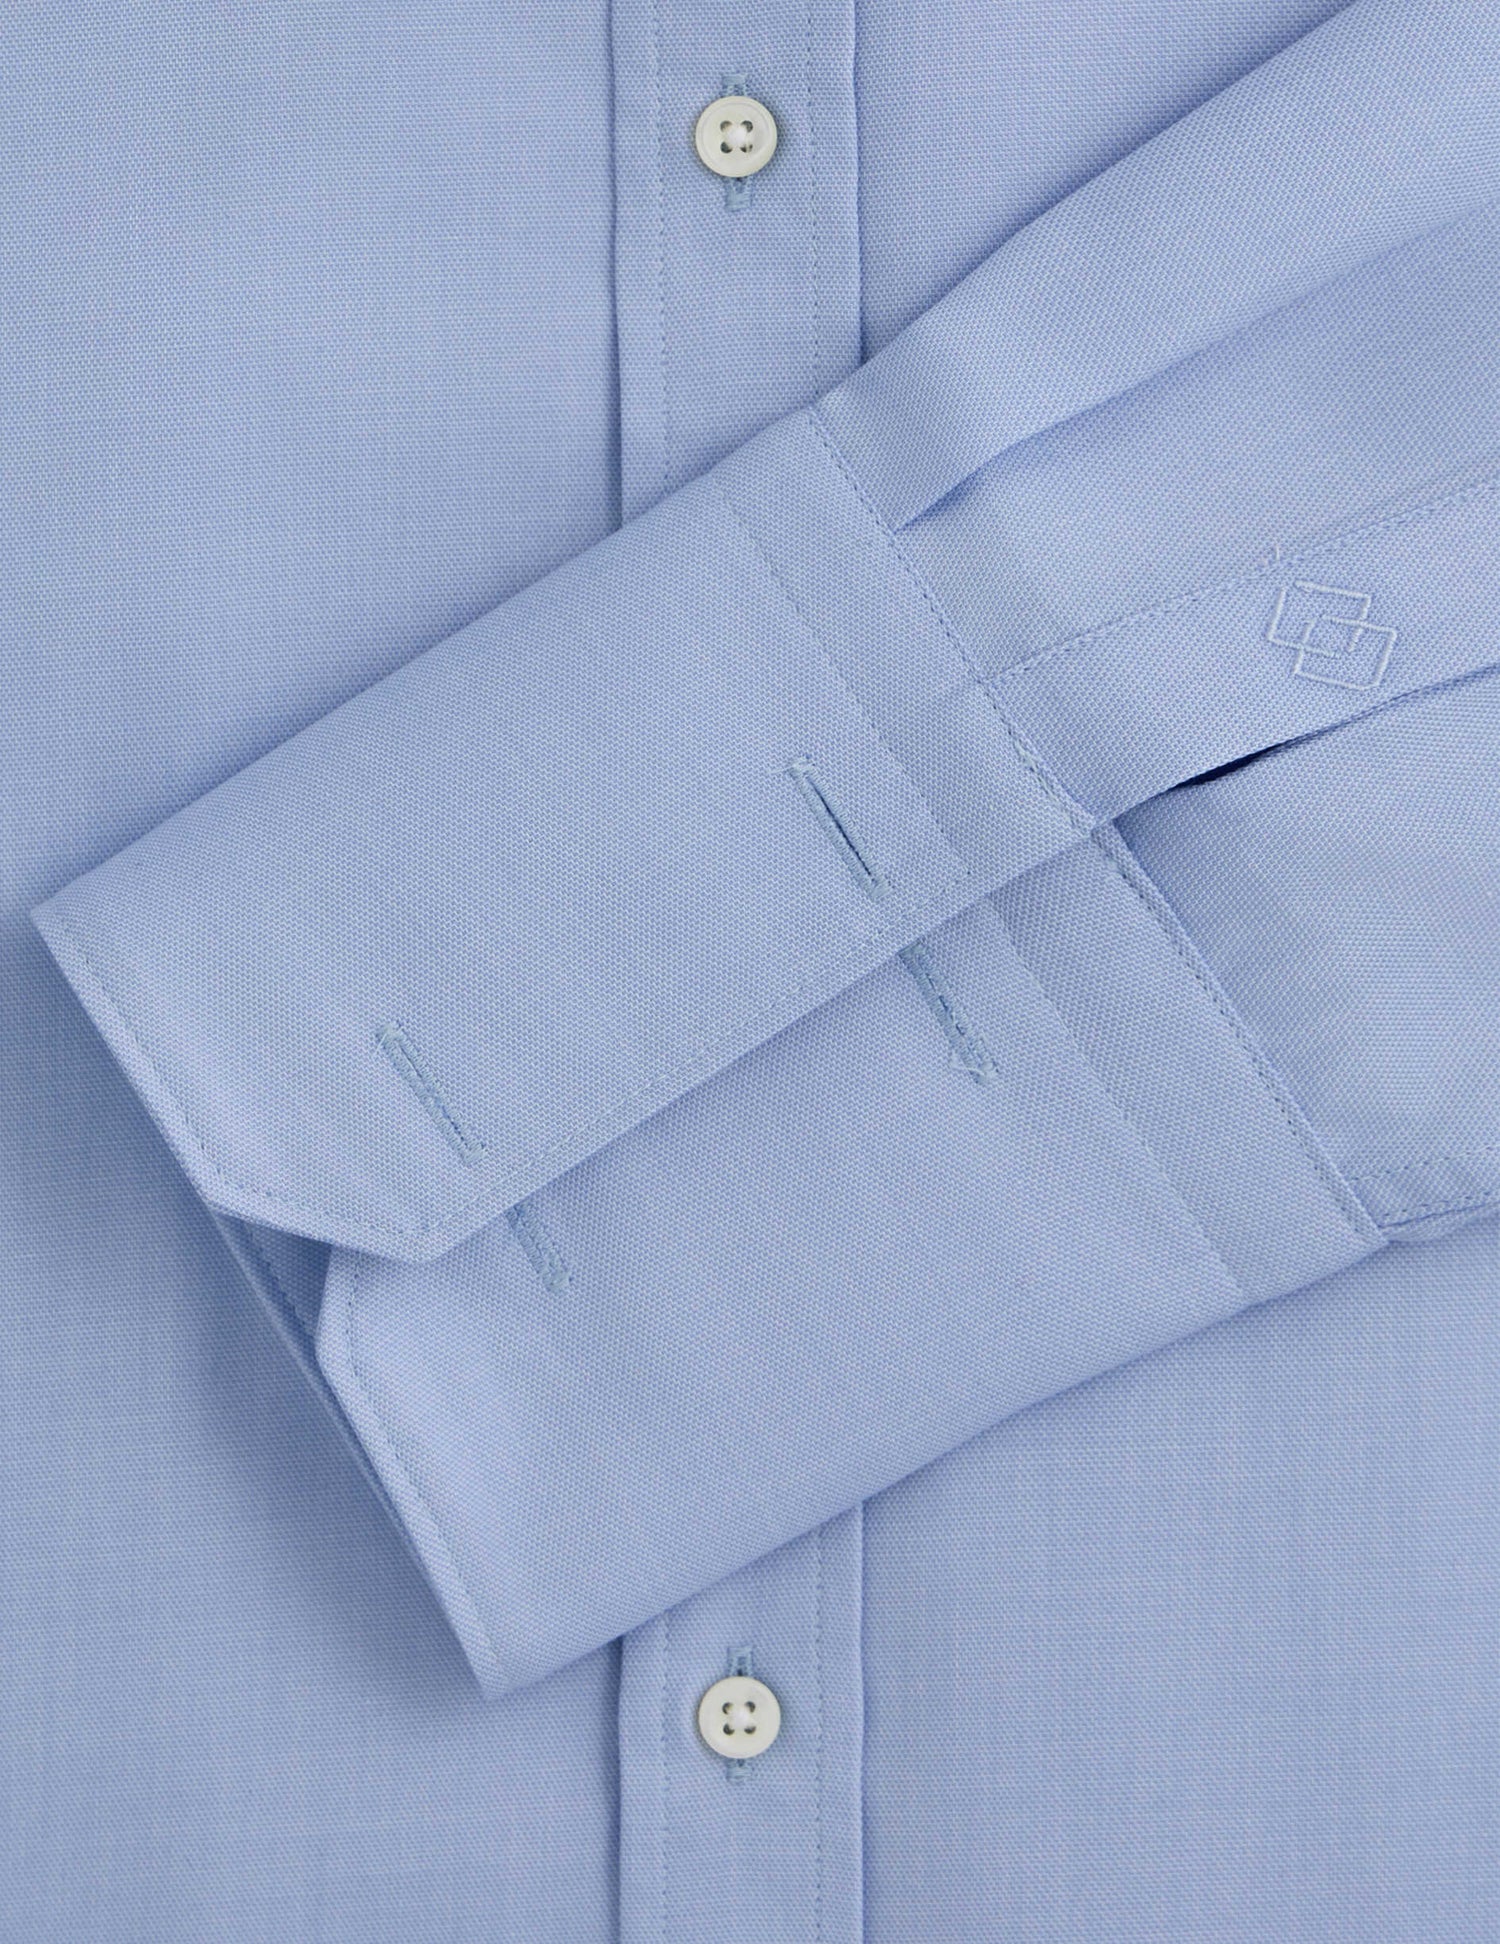 Classic blue shirt - Shaped - Figaret Collar - French Cuffs#2